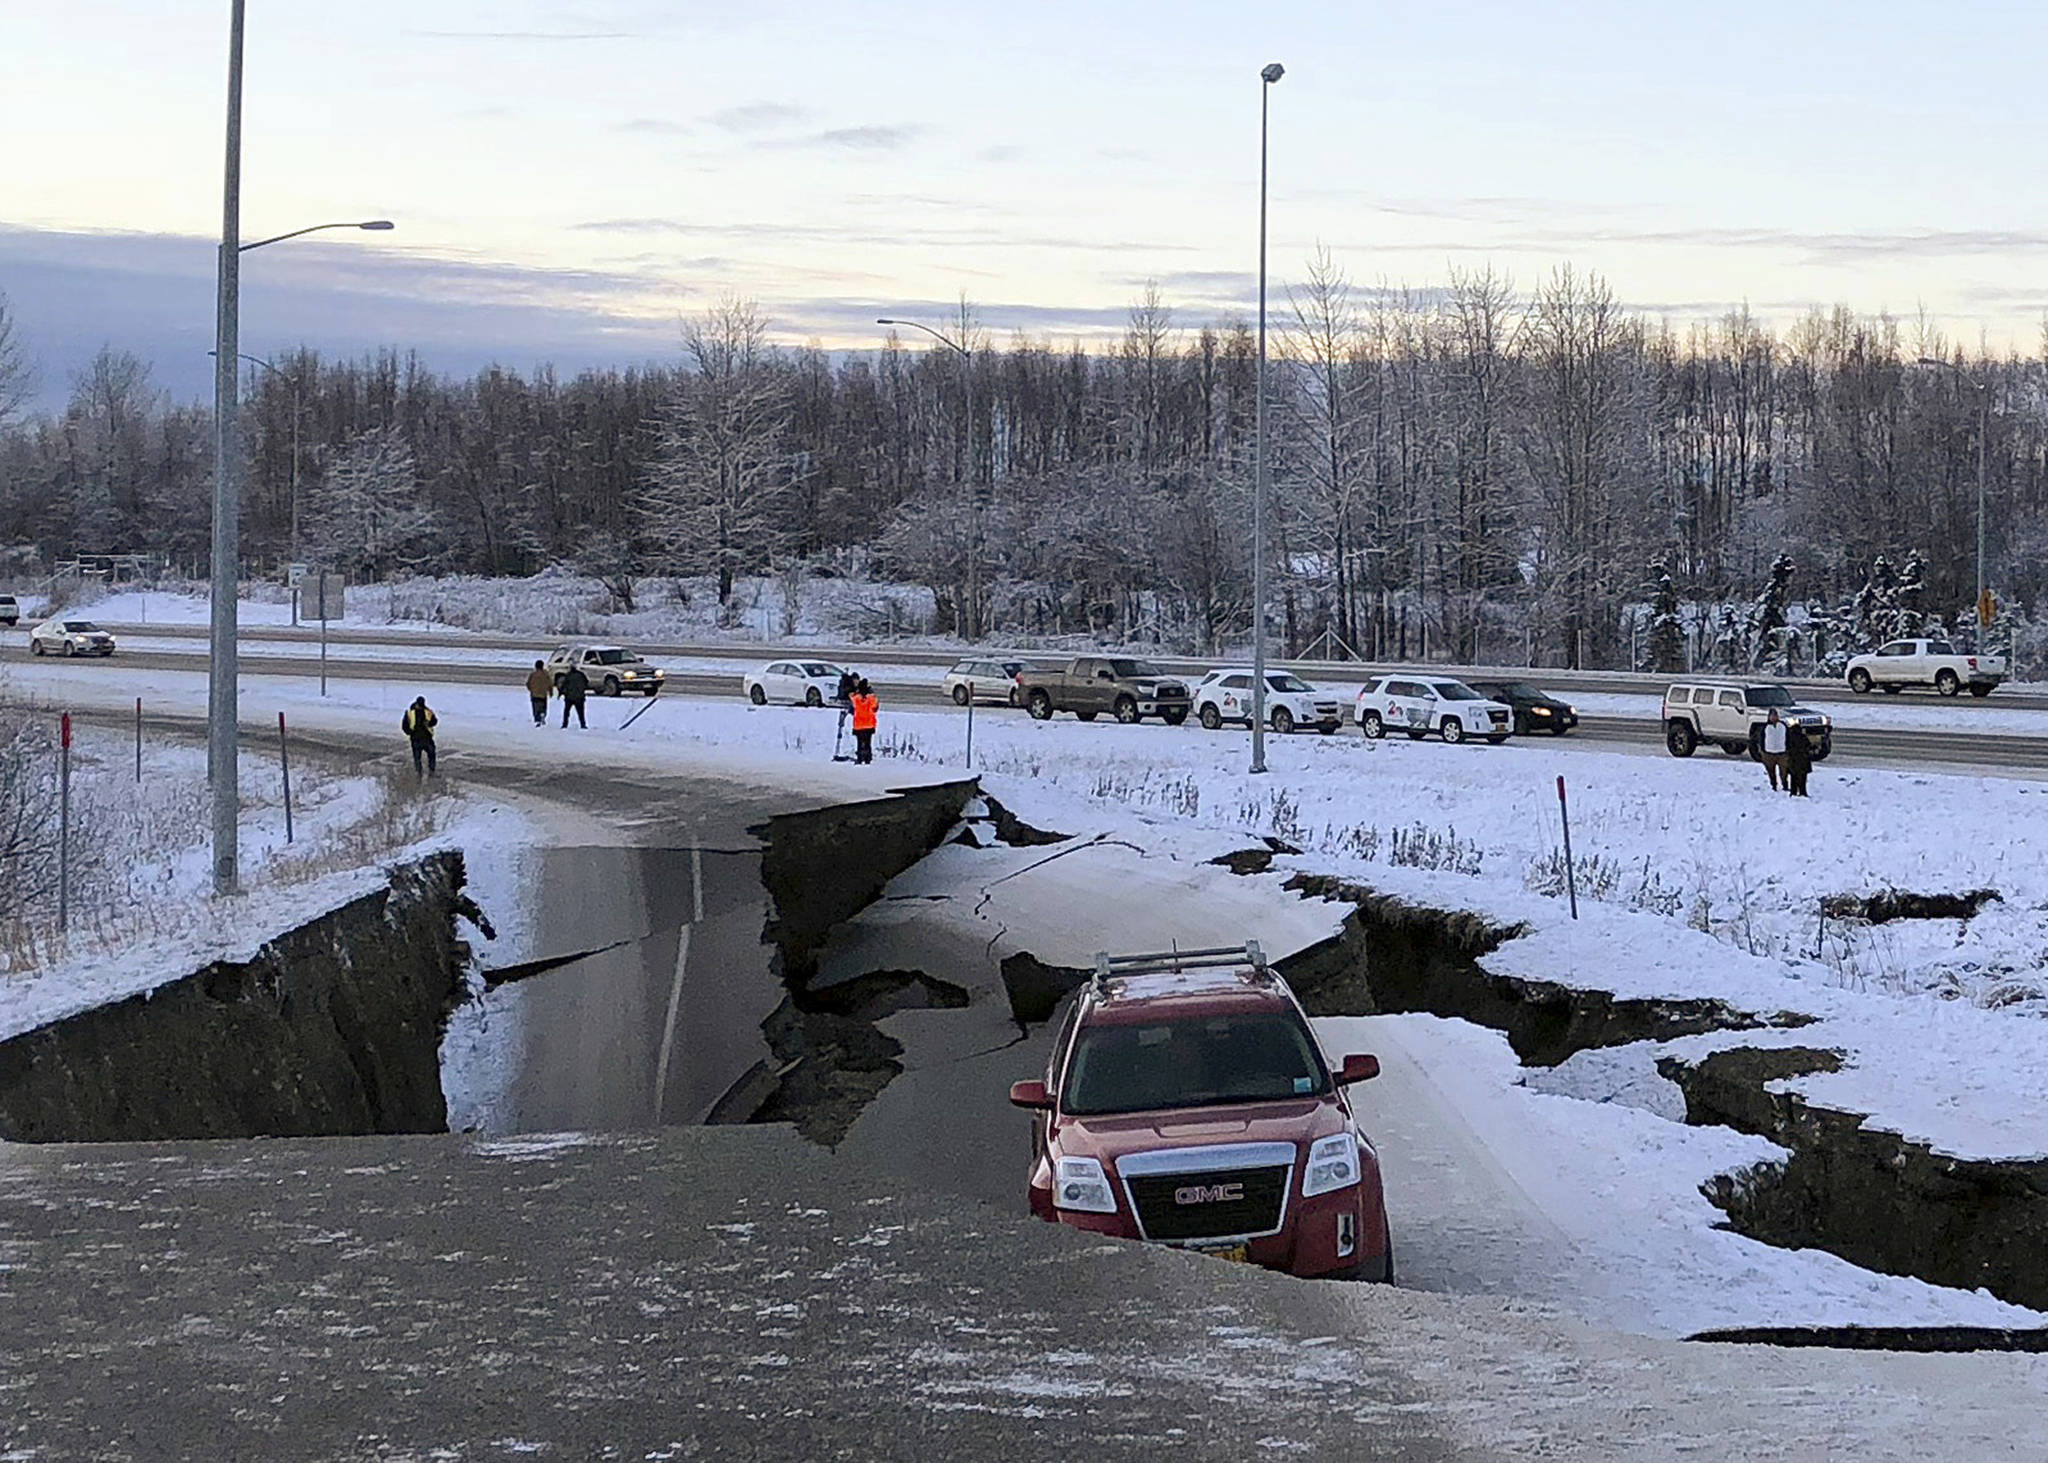 A car is trapped on a collapsed section of the offramp of Minnesota Drive in Anchorage, Friday, Nov. 30, 2018. Back-to-back earthquakes measuring 7.0 and 5.8 rocked buildings and buckled roads Friday morning in Anchorage, prompting people to run from their offices or seek shelter under office desks, while a tsunami warning had some seeking higher ground. (Dan Joling | Associated Press)